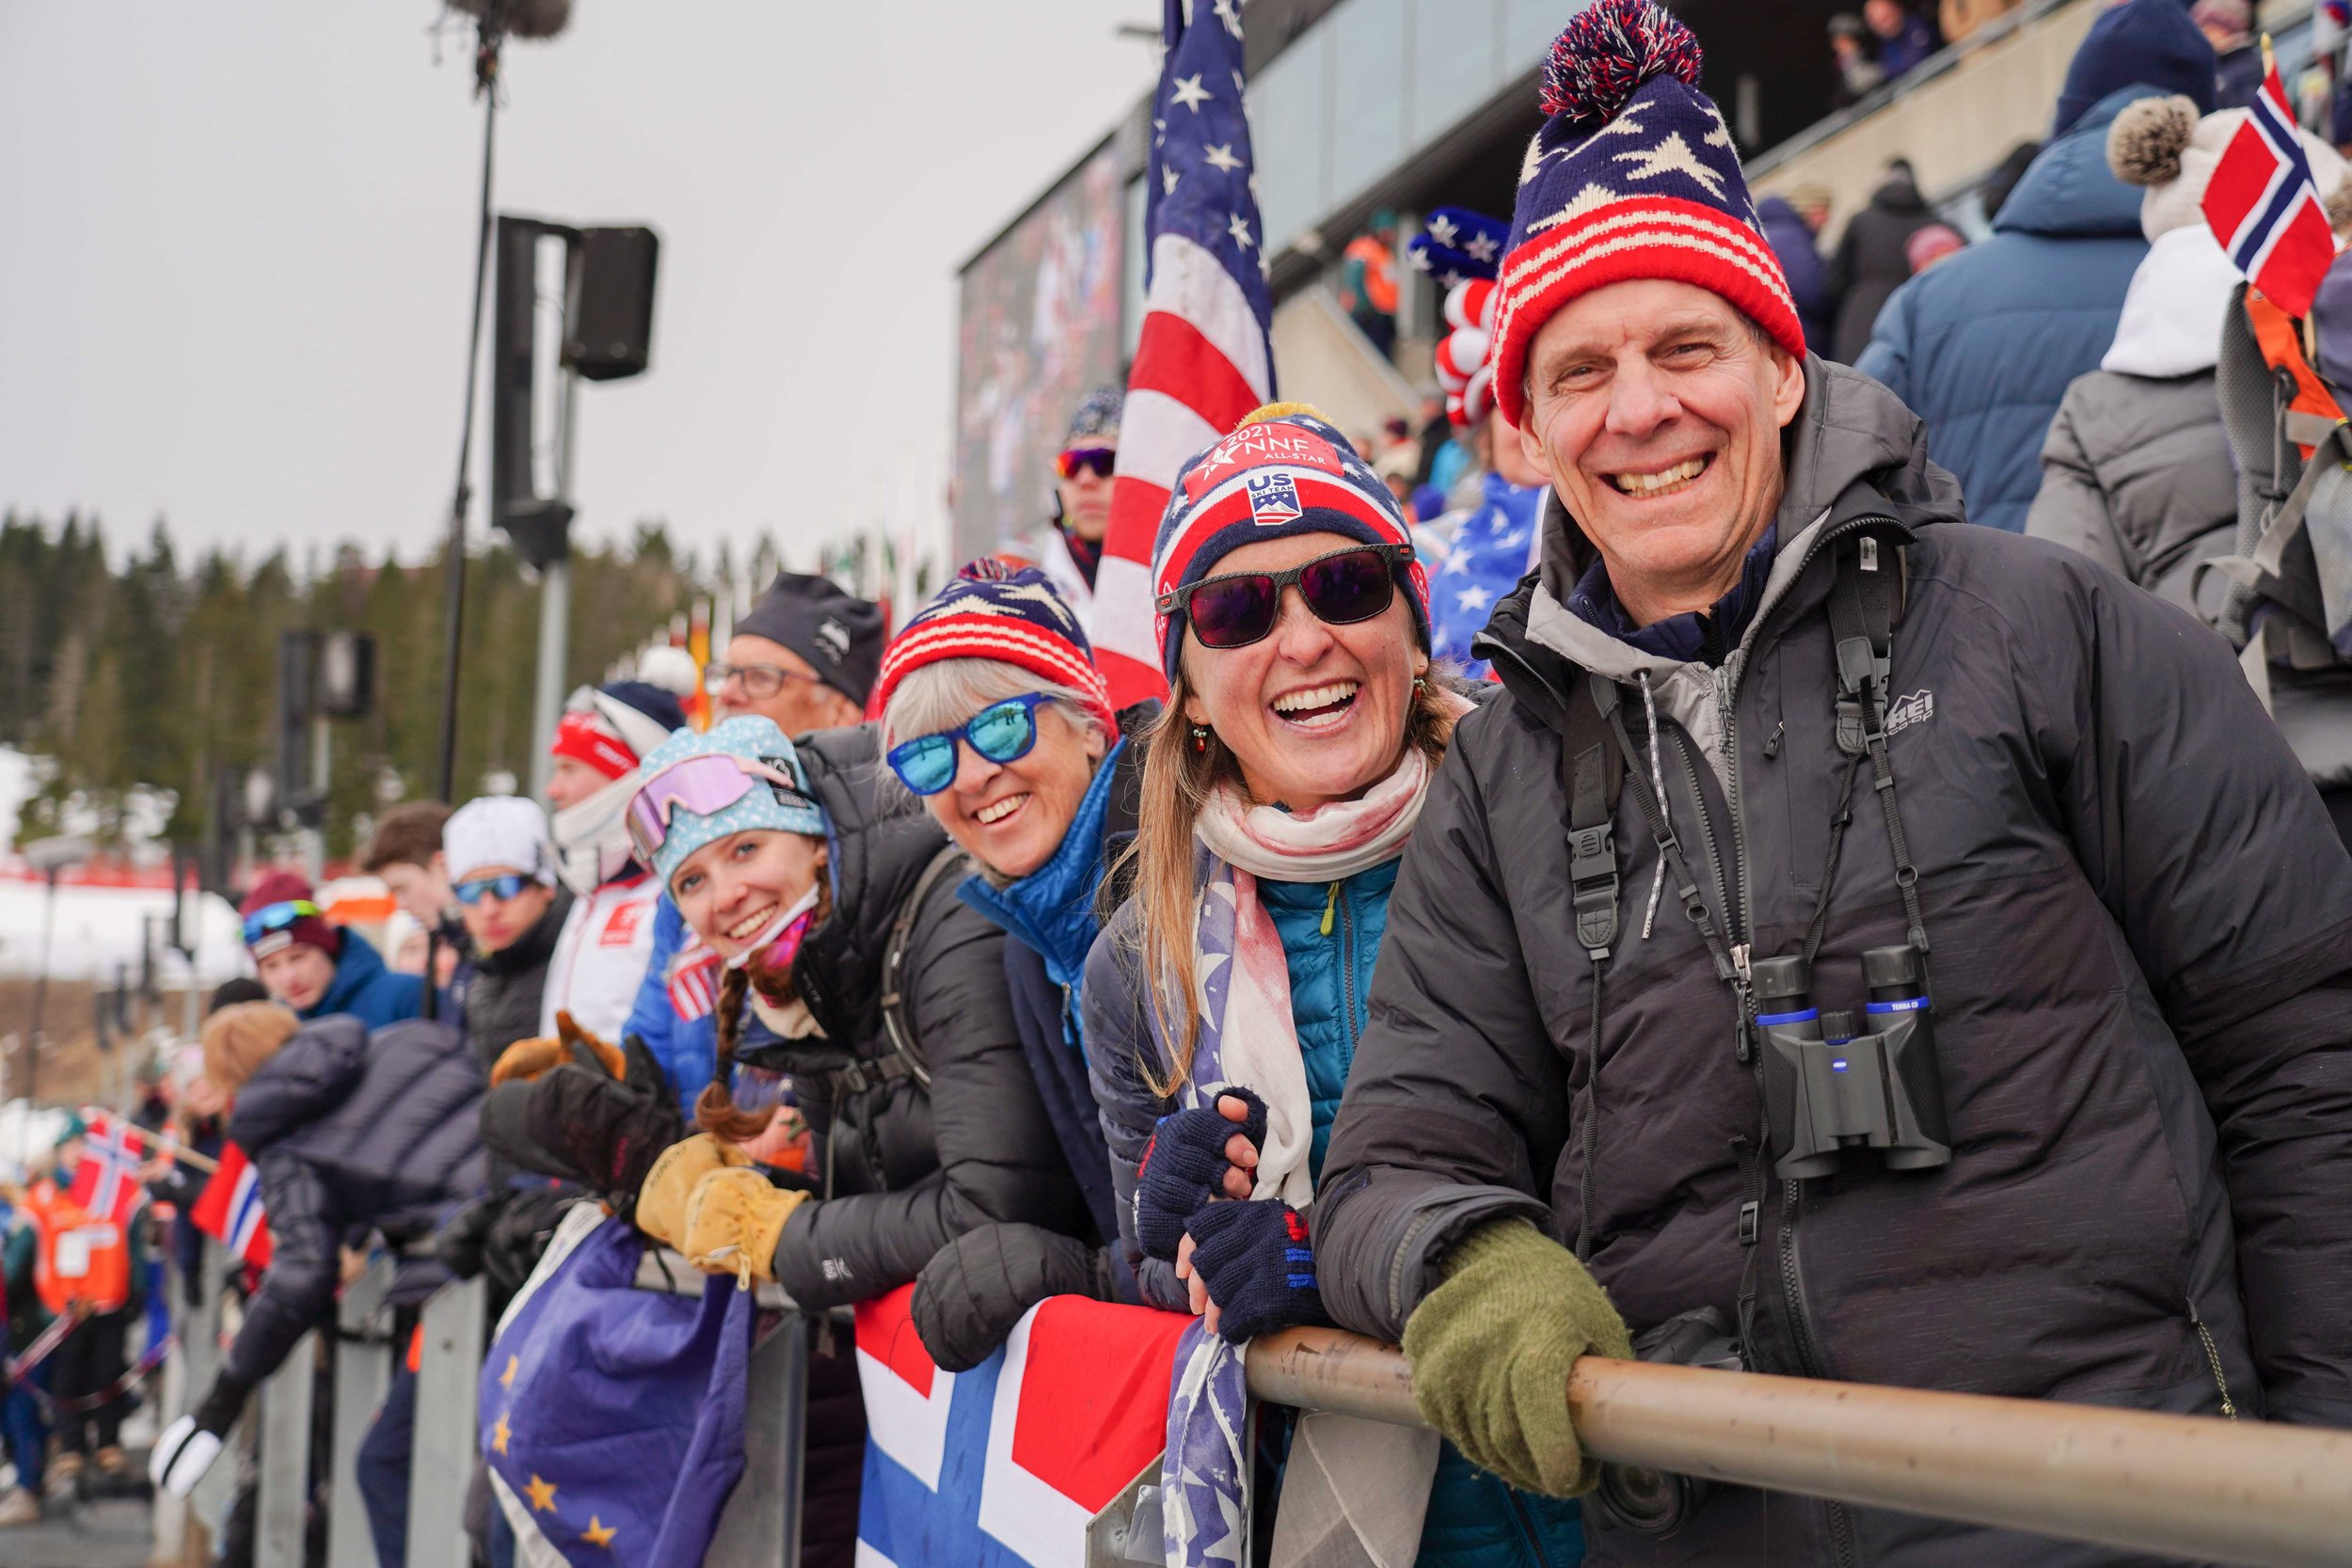 Grandstand tickets for the Holmenkollen World Cup events